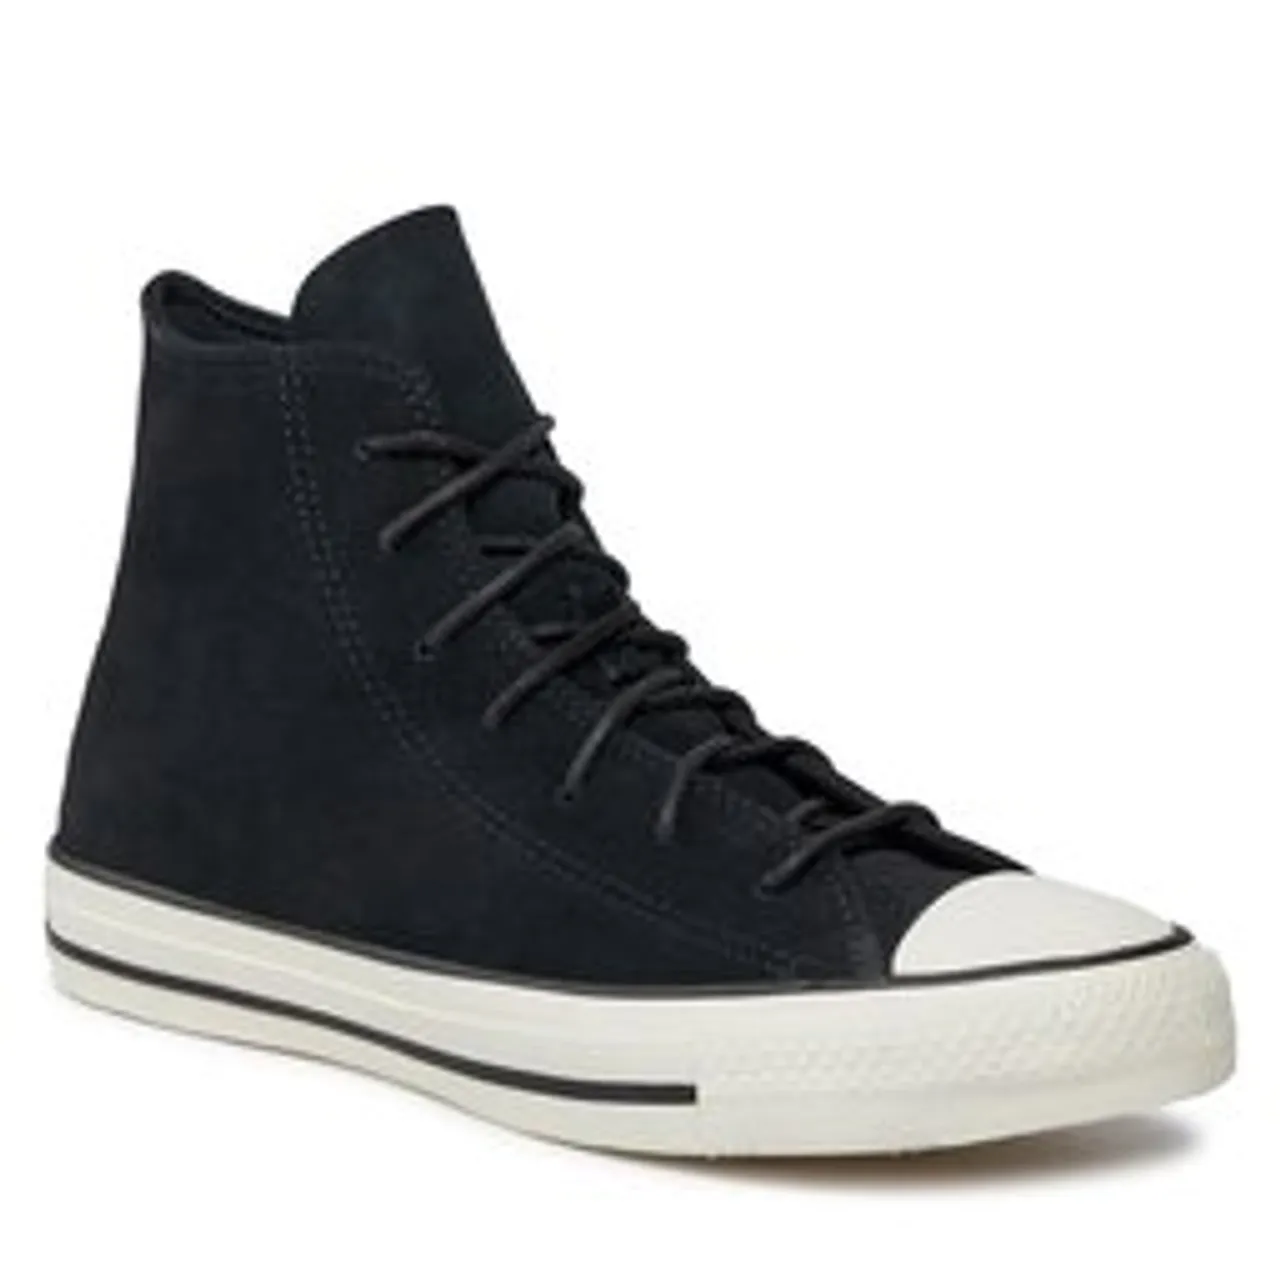 Sneakers aus Stoff Converse Chuck Taylor All Star A04637C Black